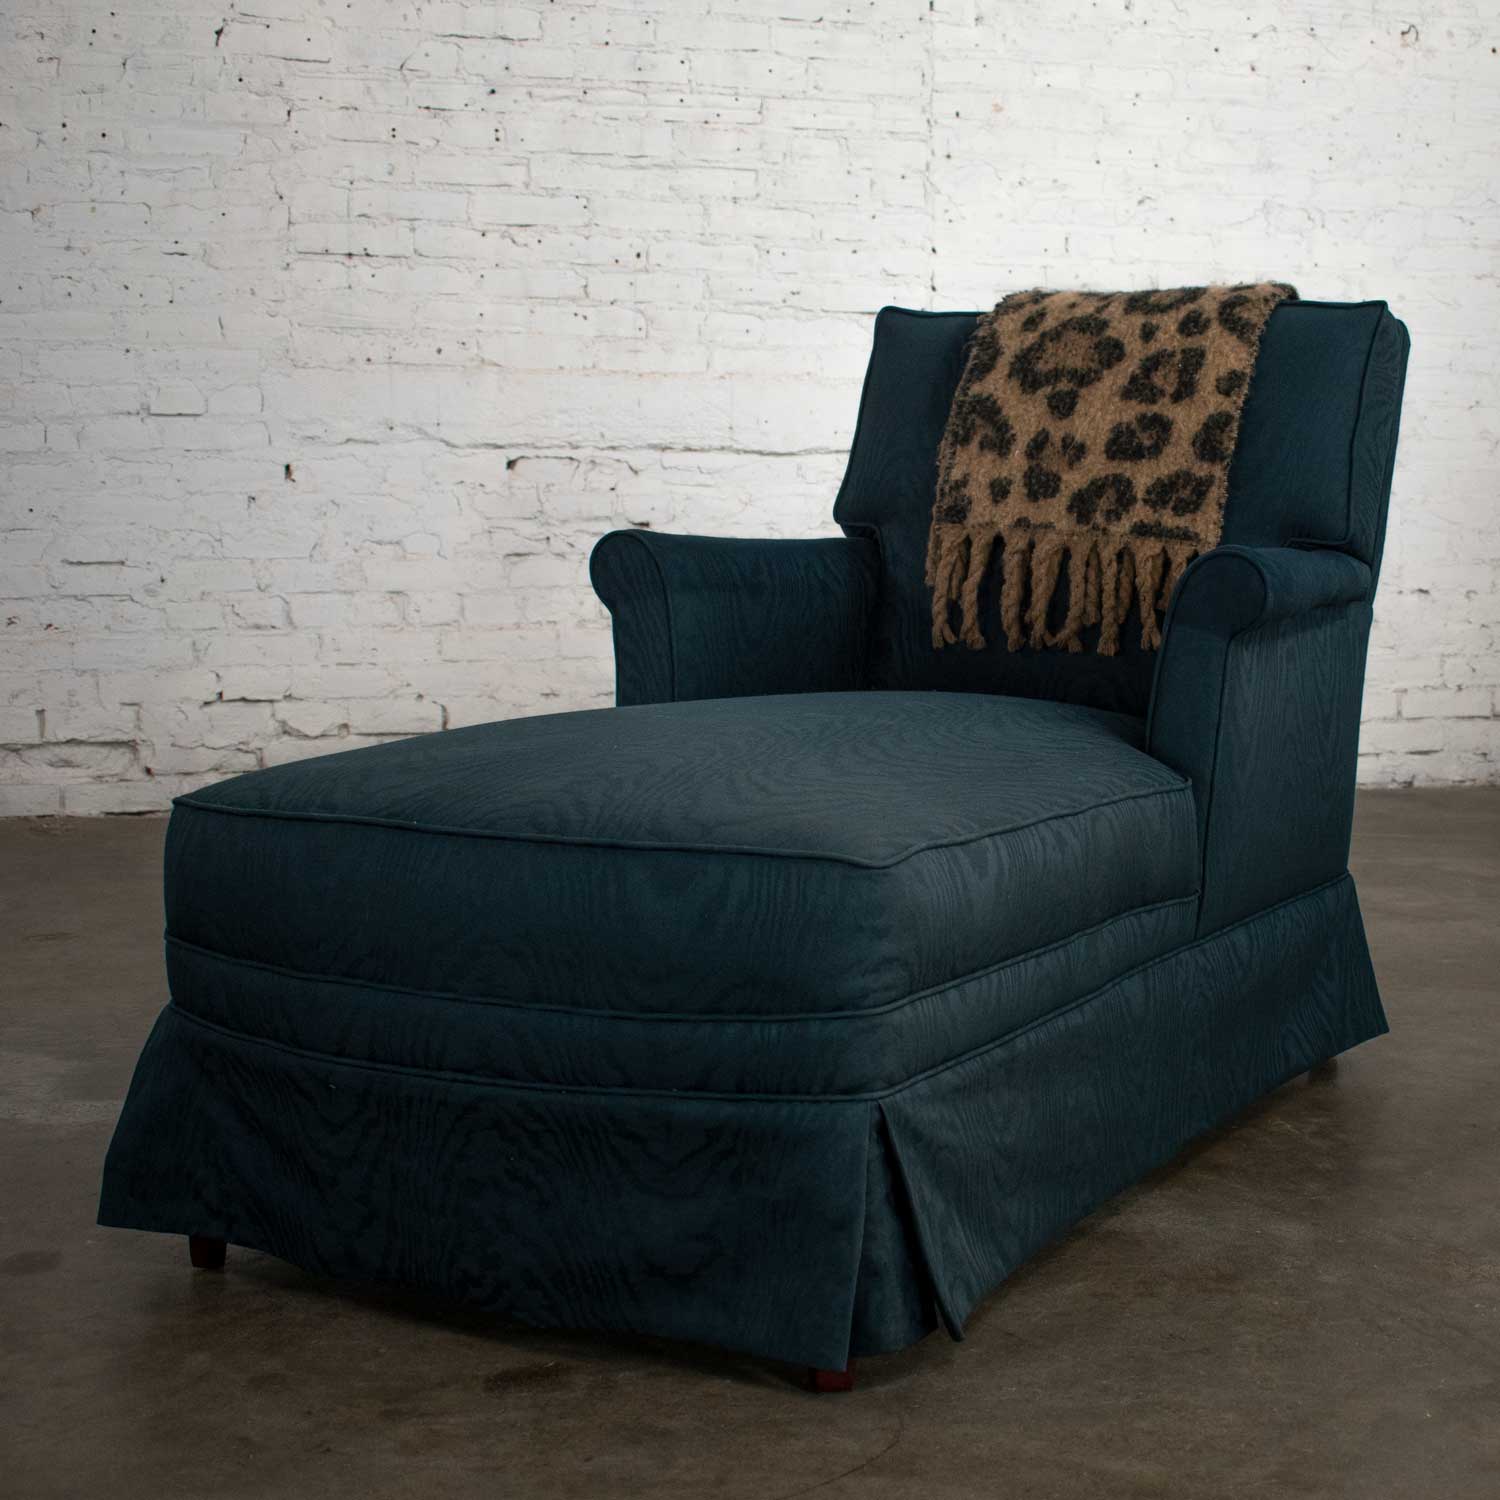 Traditional Chaise Lounge with Navy Blue Cotton Moire Fabric and Rolled Arms